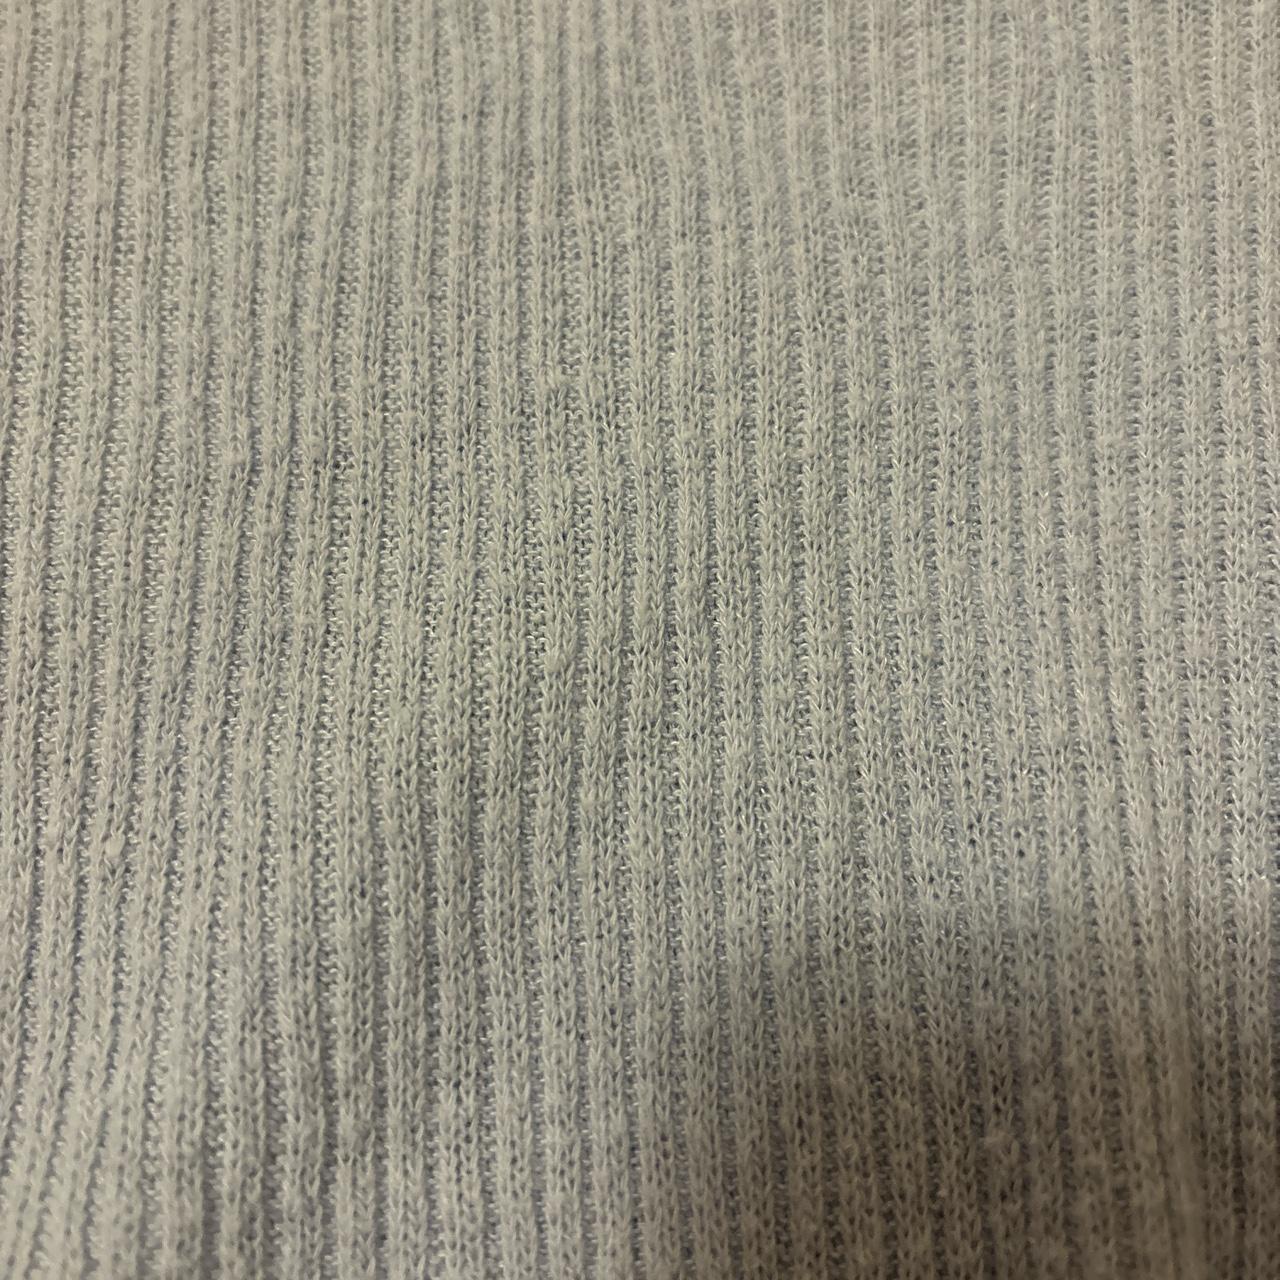 pacsun tie top, some texture but not too noticeable